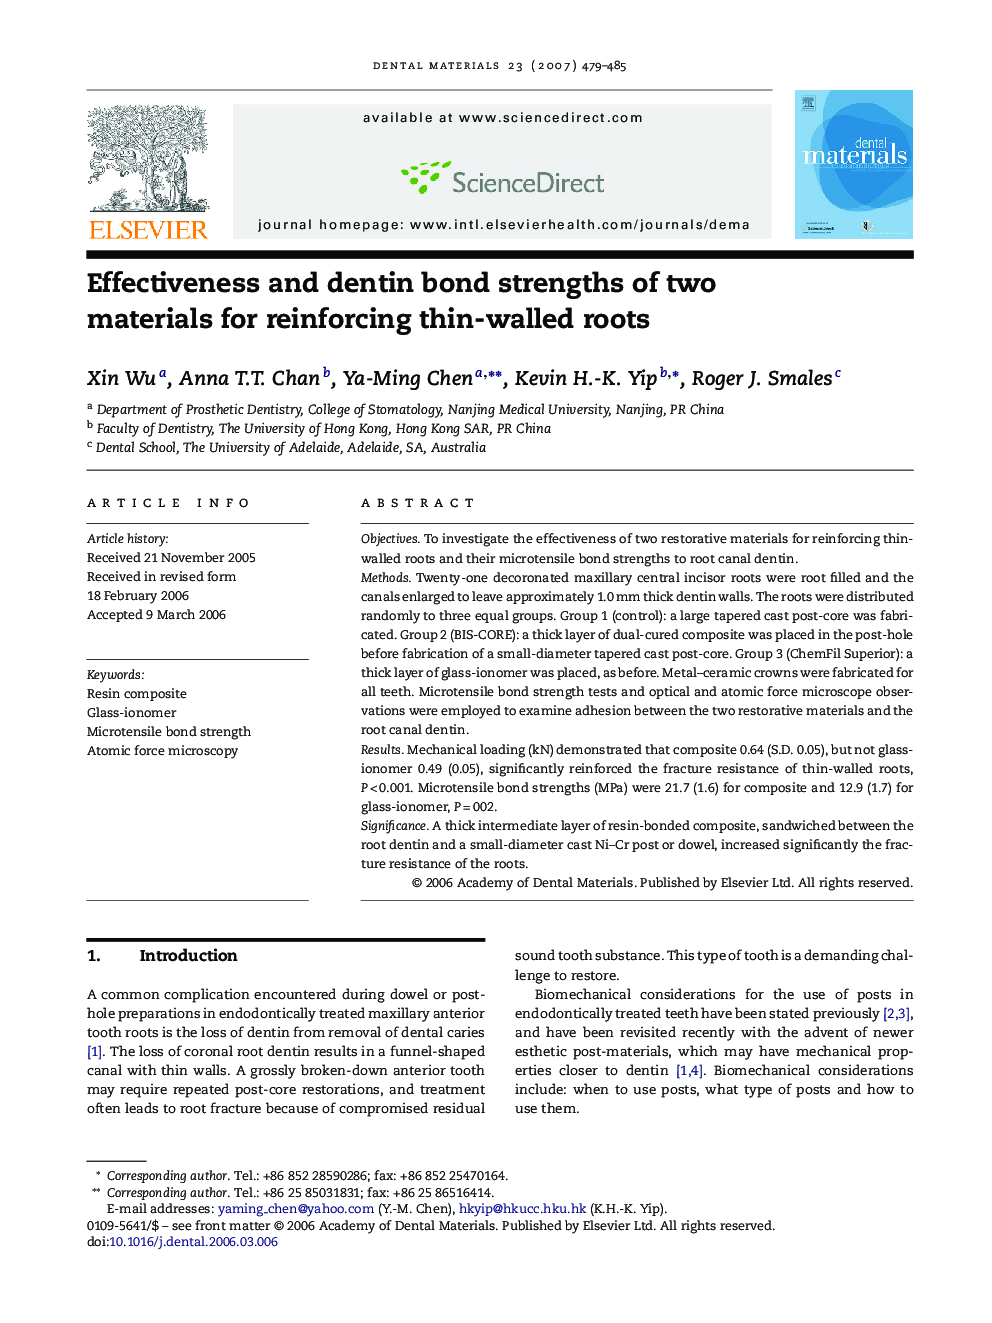 Effectiveness and dentin bond strengths of two materials for reinforcing thin-walled roots